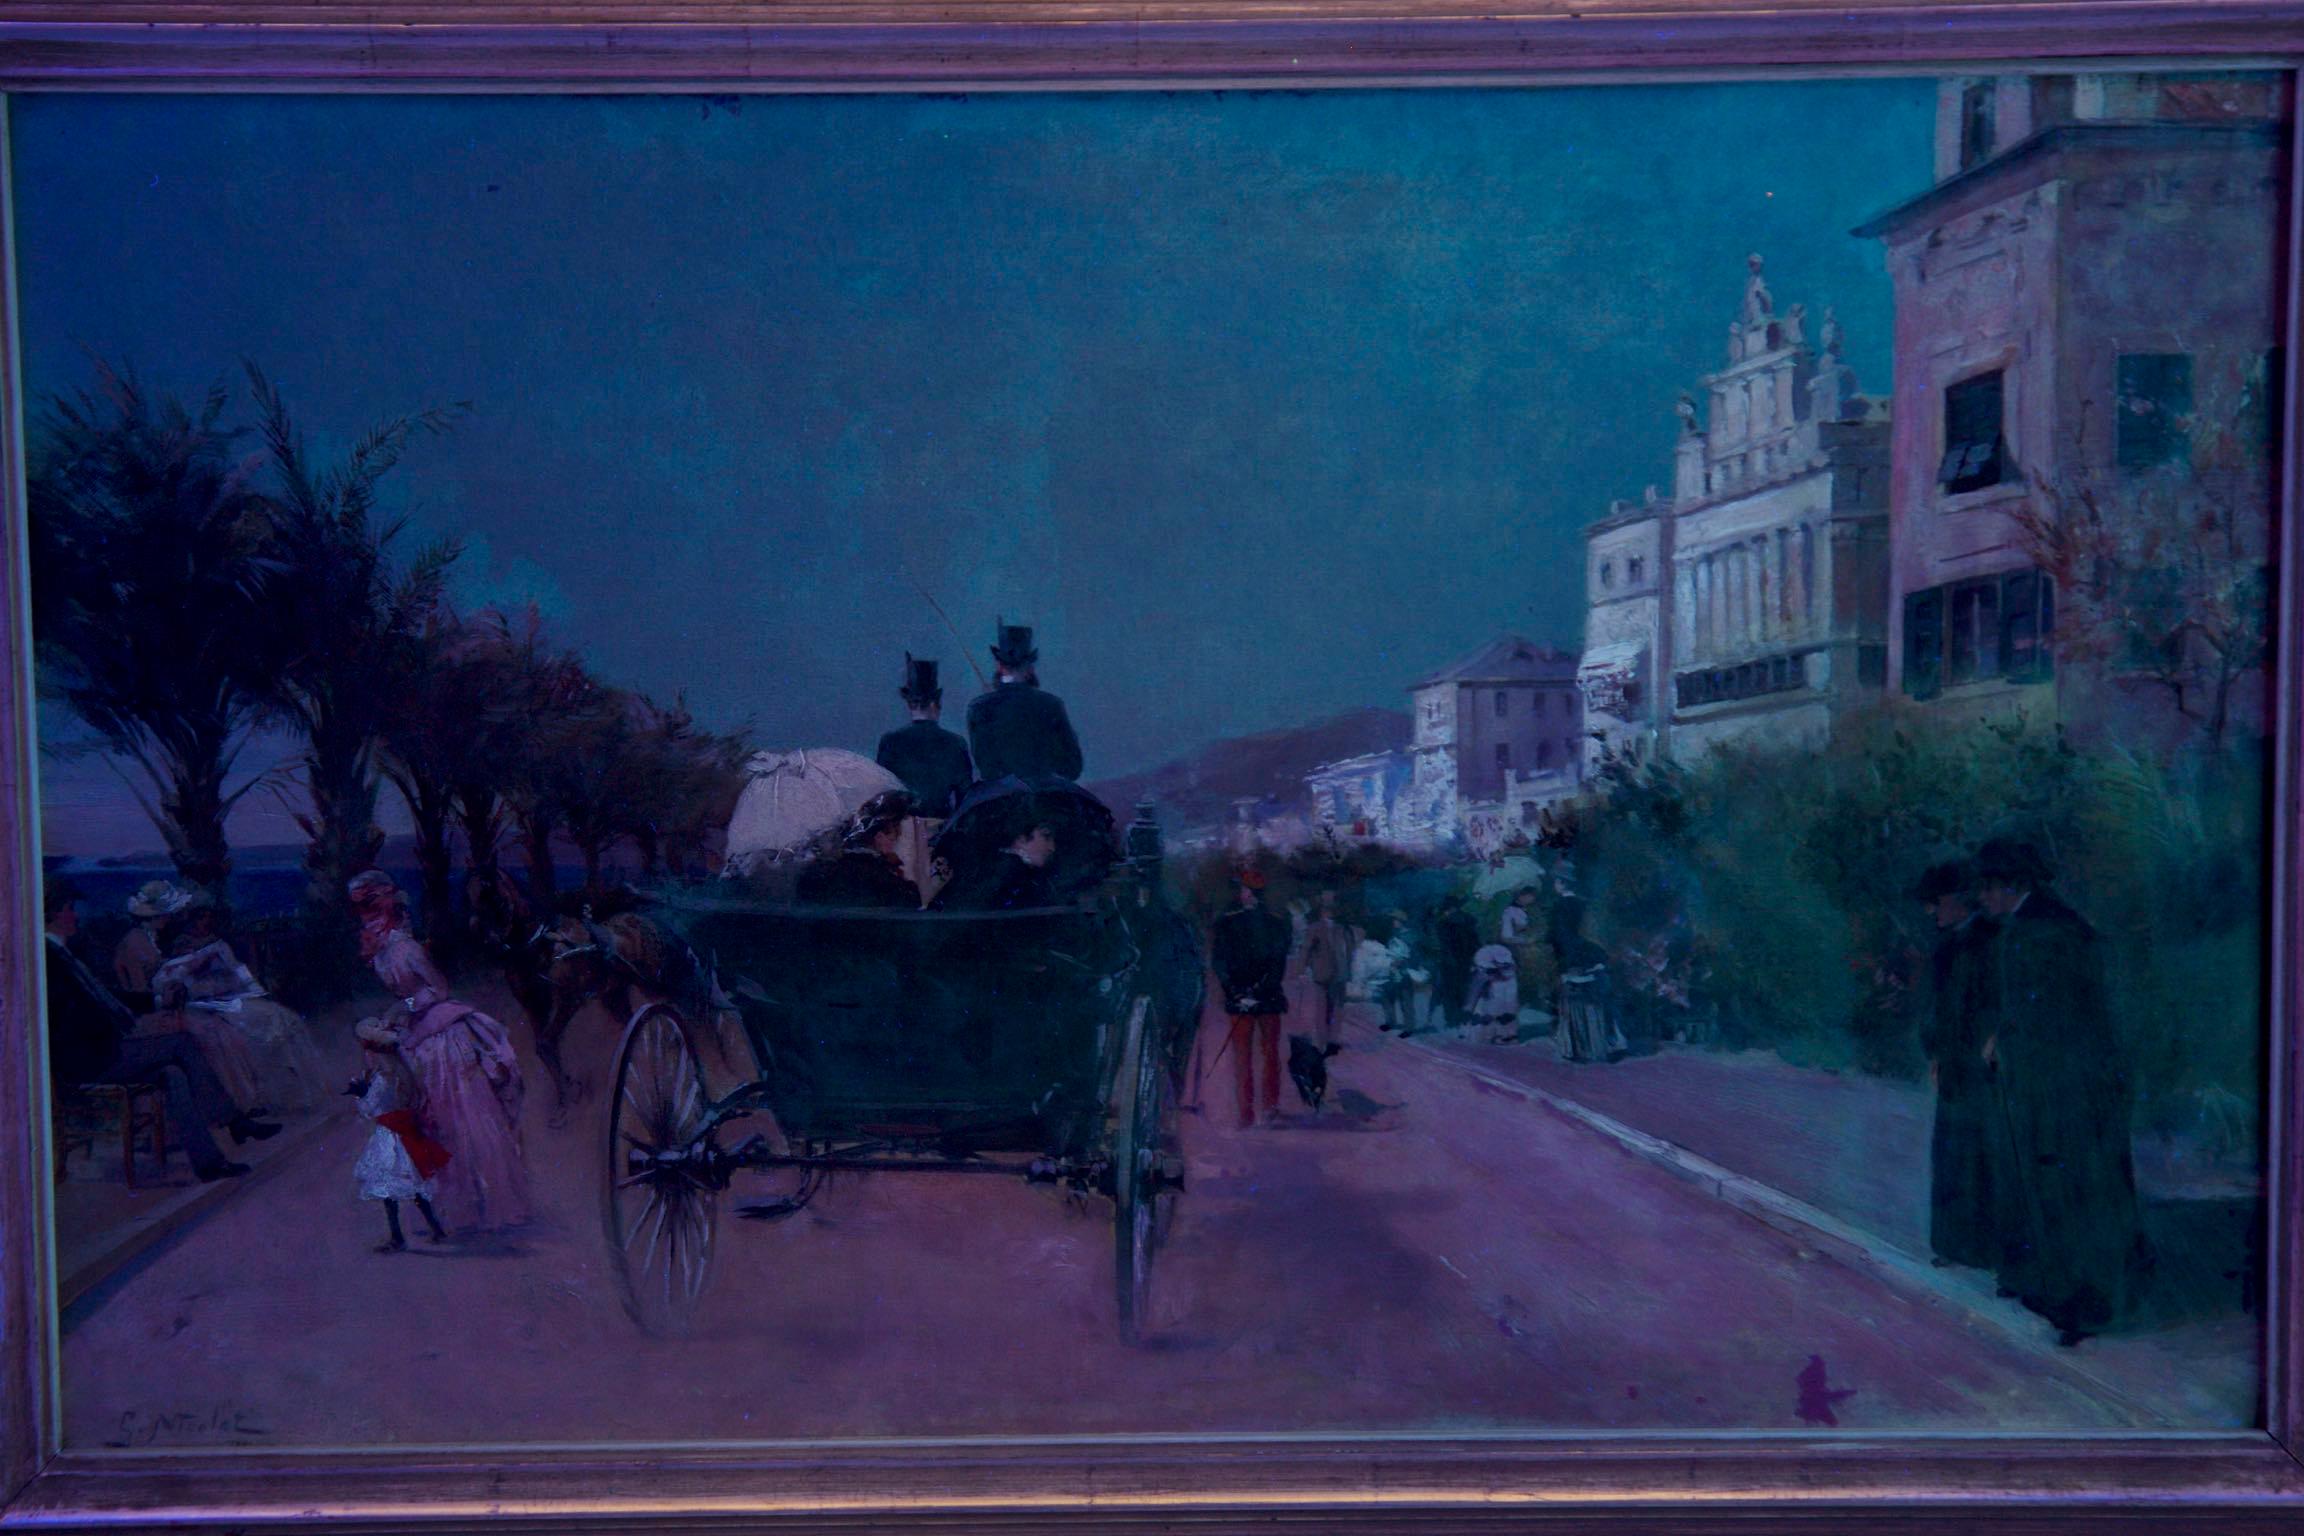 A complex scene full of vivid color and life, Gabriel Nicolet depicts a busy seaside street in Nice during the last quarter of the 19th century. The wealth of figures and faces along the dusty dirt street brings the scene to life, allowing us a